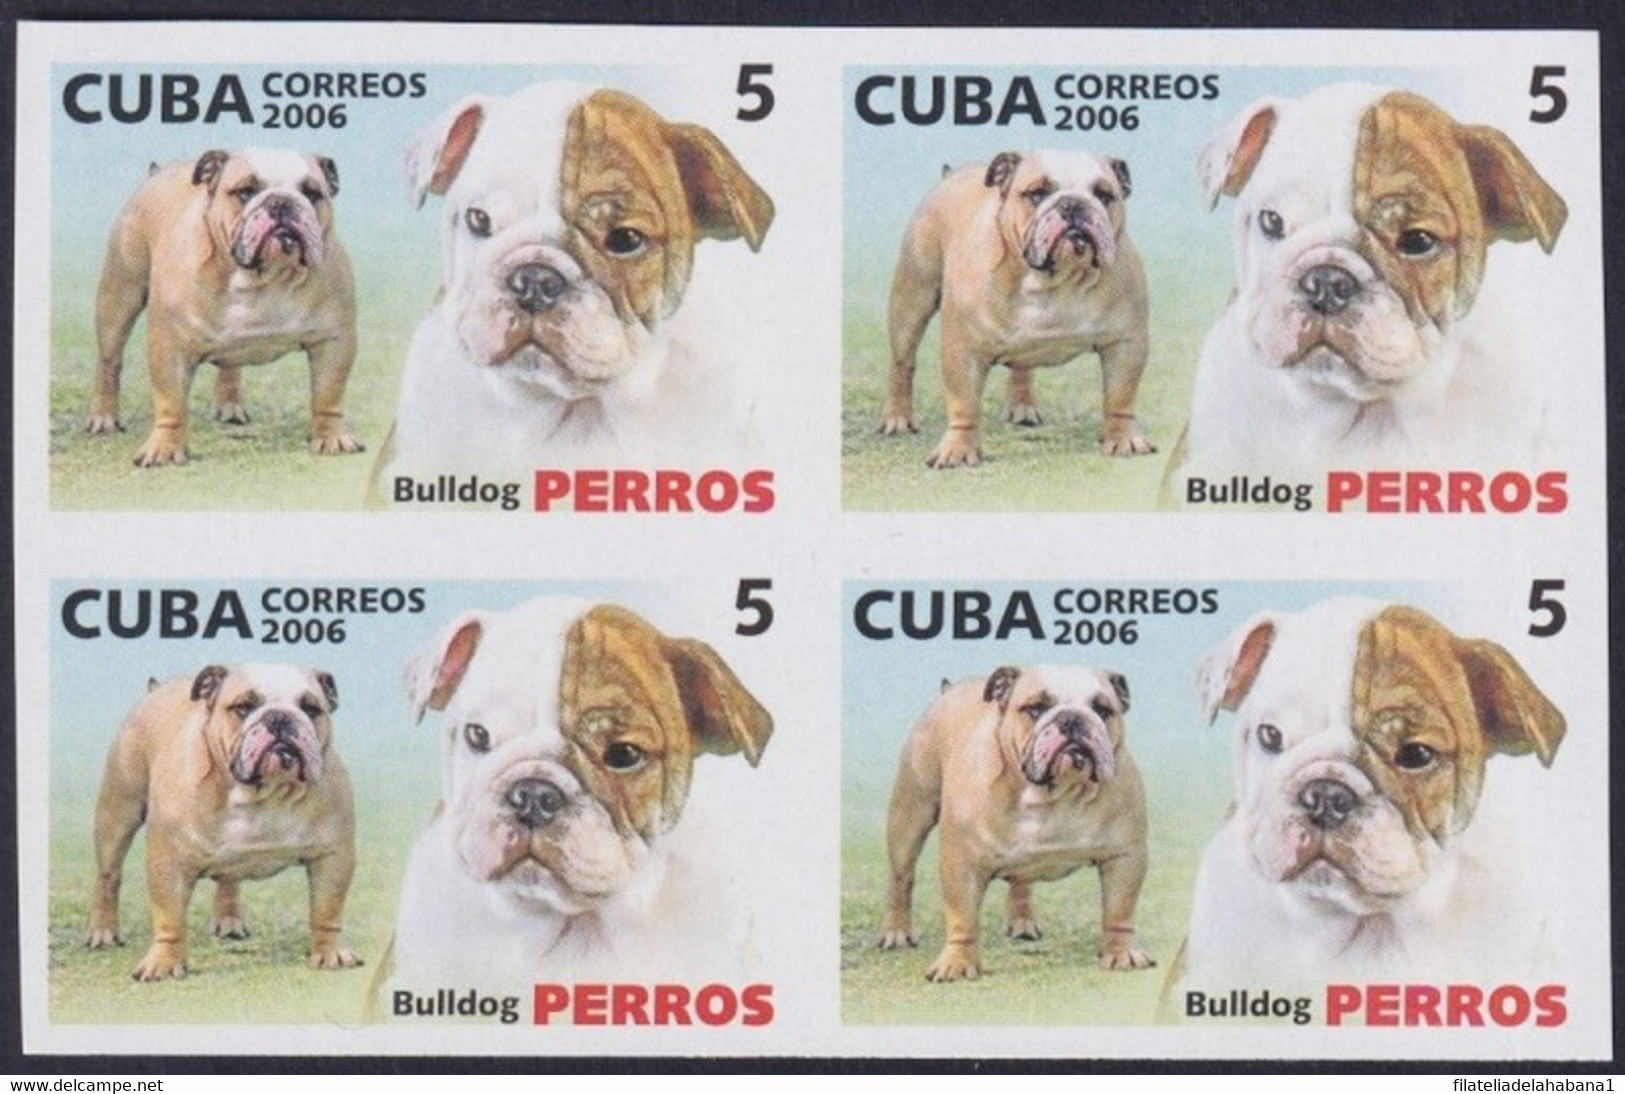 2006.734 CUBA 2006 5c MNH IMPERFORATED PROOF PERROS DOG BULLDOG. - Imperforates, Proofs & Errors